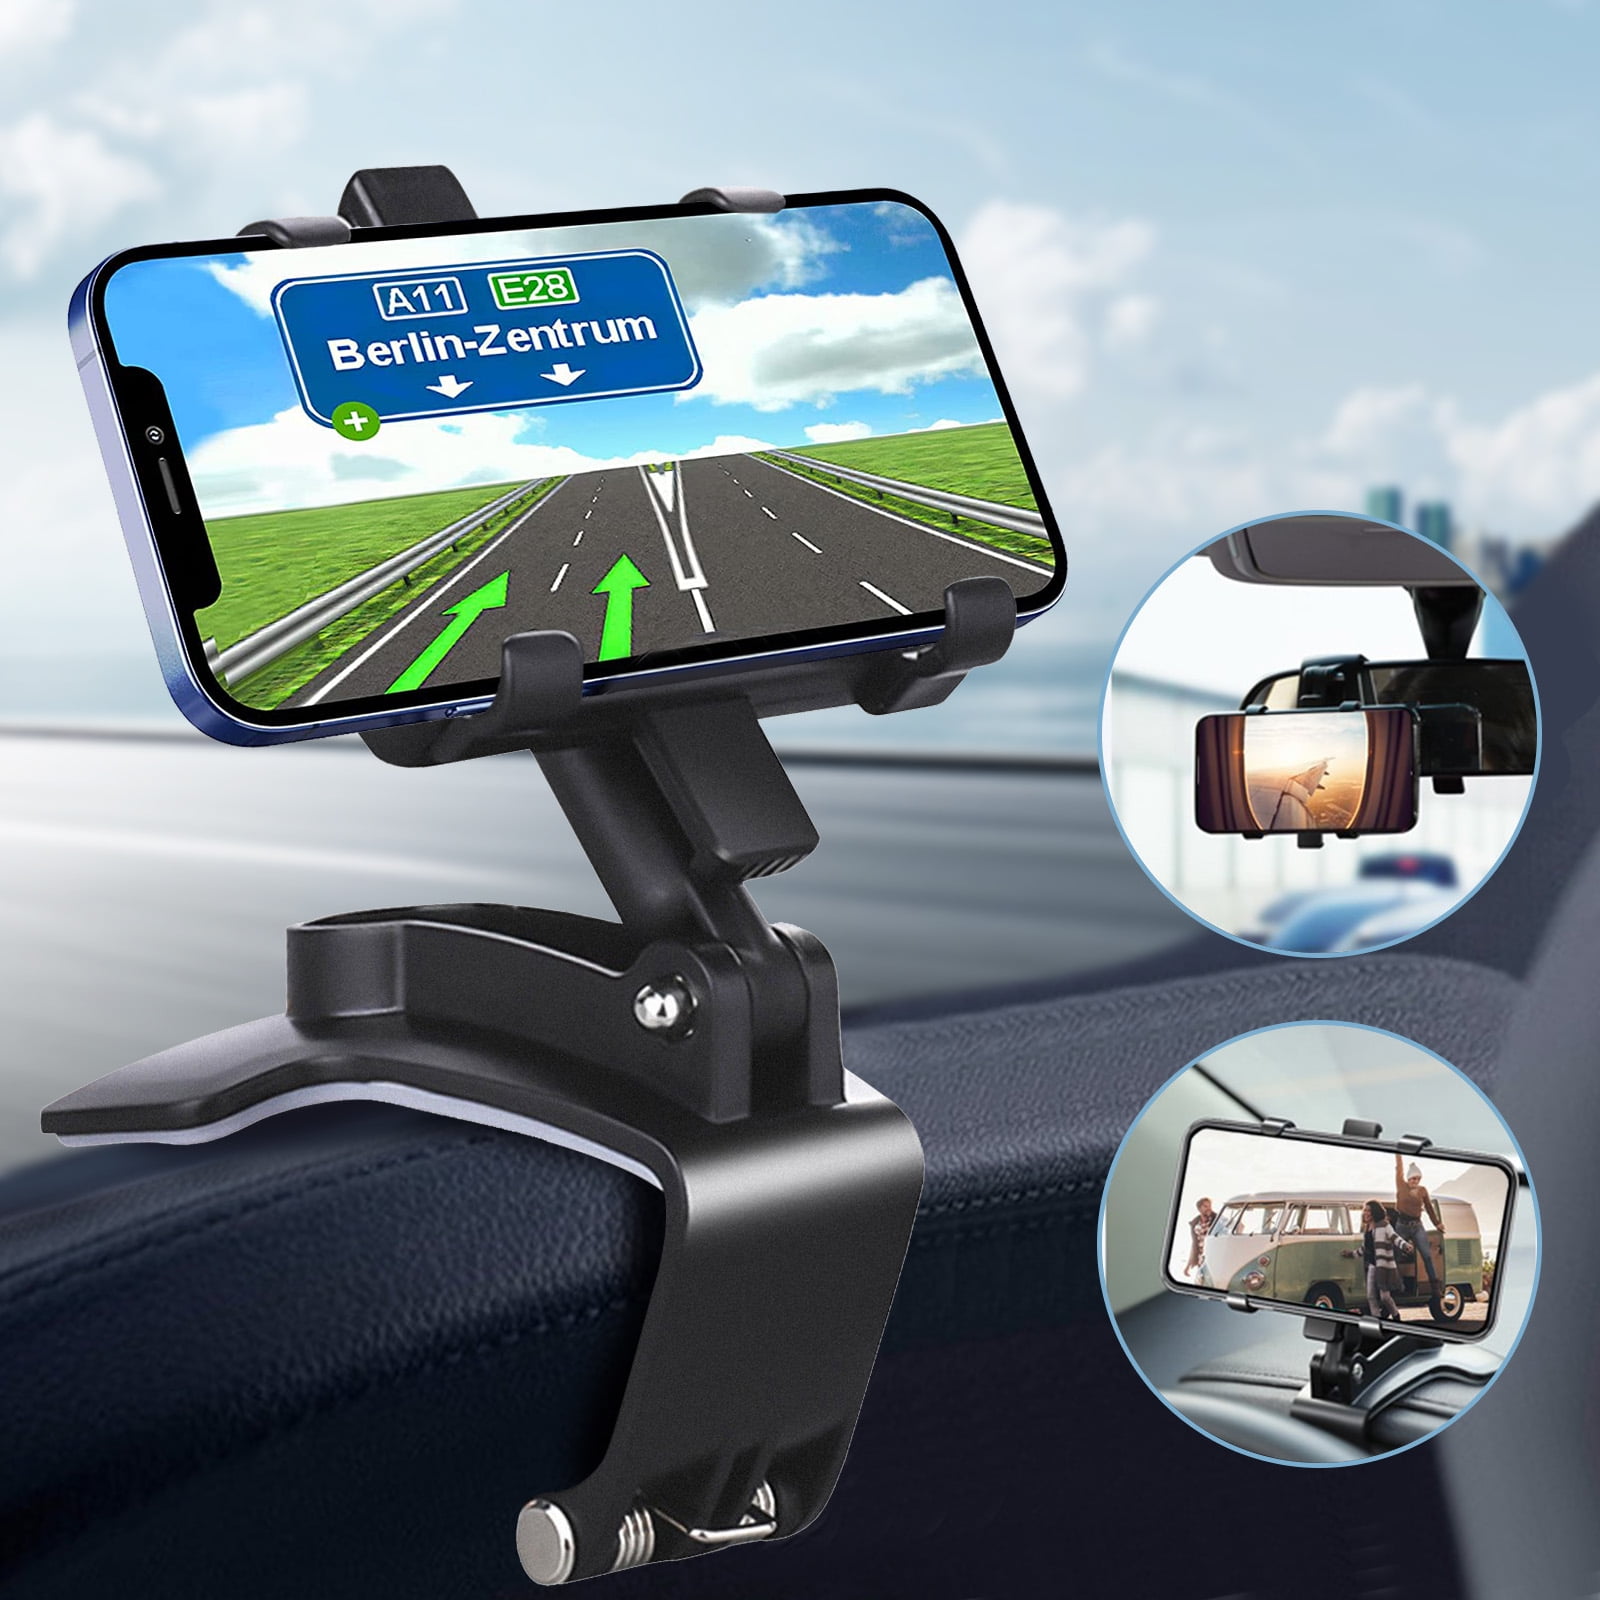 Cellet Vehicle Air Vent Phone Holder Mount Compatible with iPhone 11 Pro  Max Xr Xs Max X SE 8 7 Plus Galaxy S10 S9 S8 S7 Note 10 9 8 Pixel 4 3 XL And